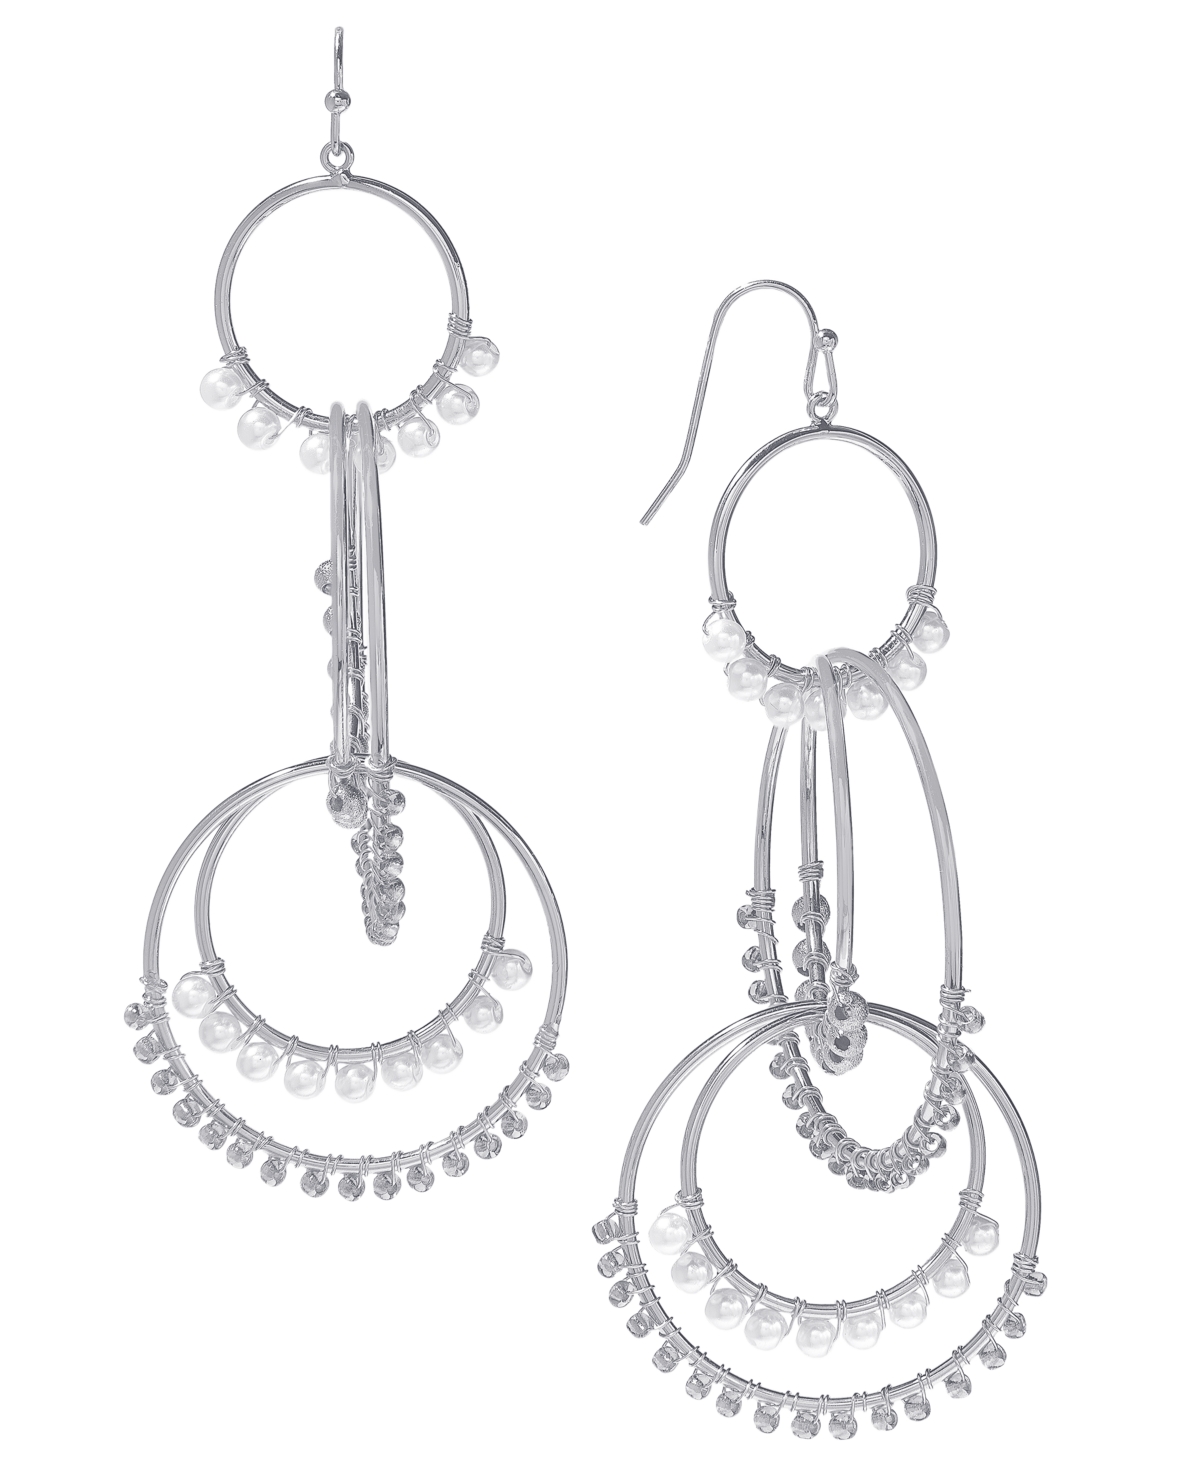 Mixed Bead Orbital Drop Statement Earrings, Created for Macy's - Silver